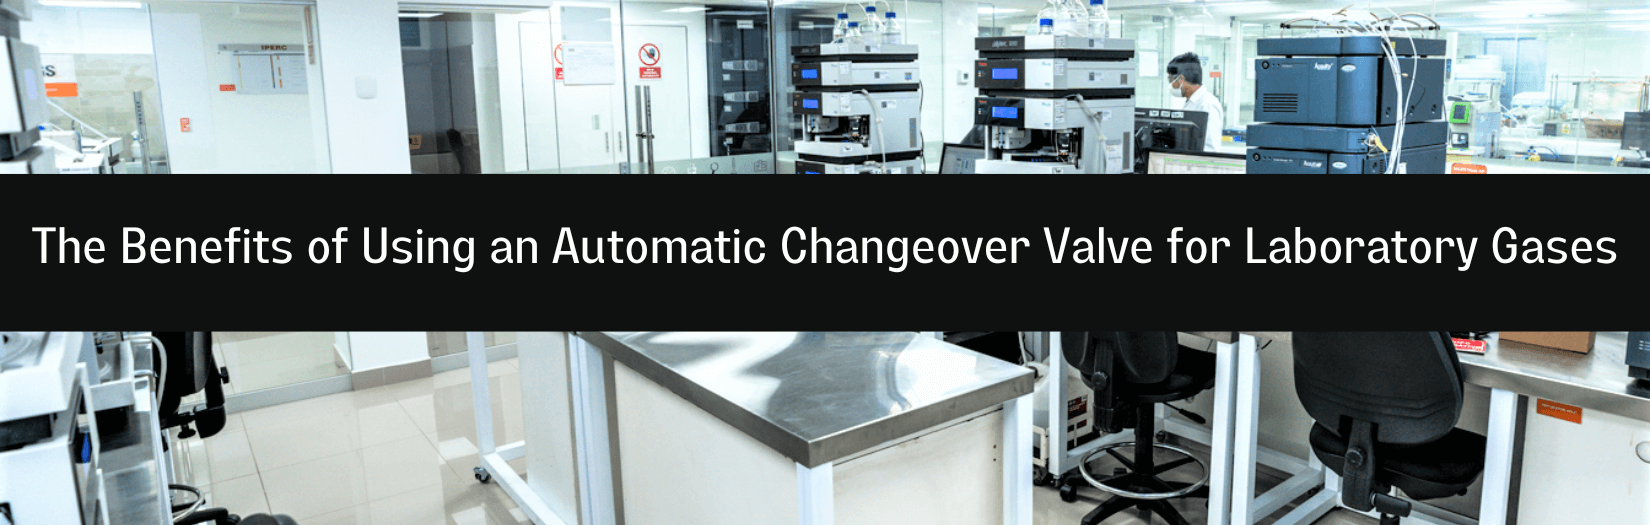 automatic changeover valve for laboratory